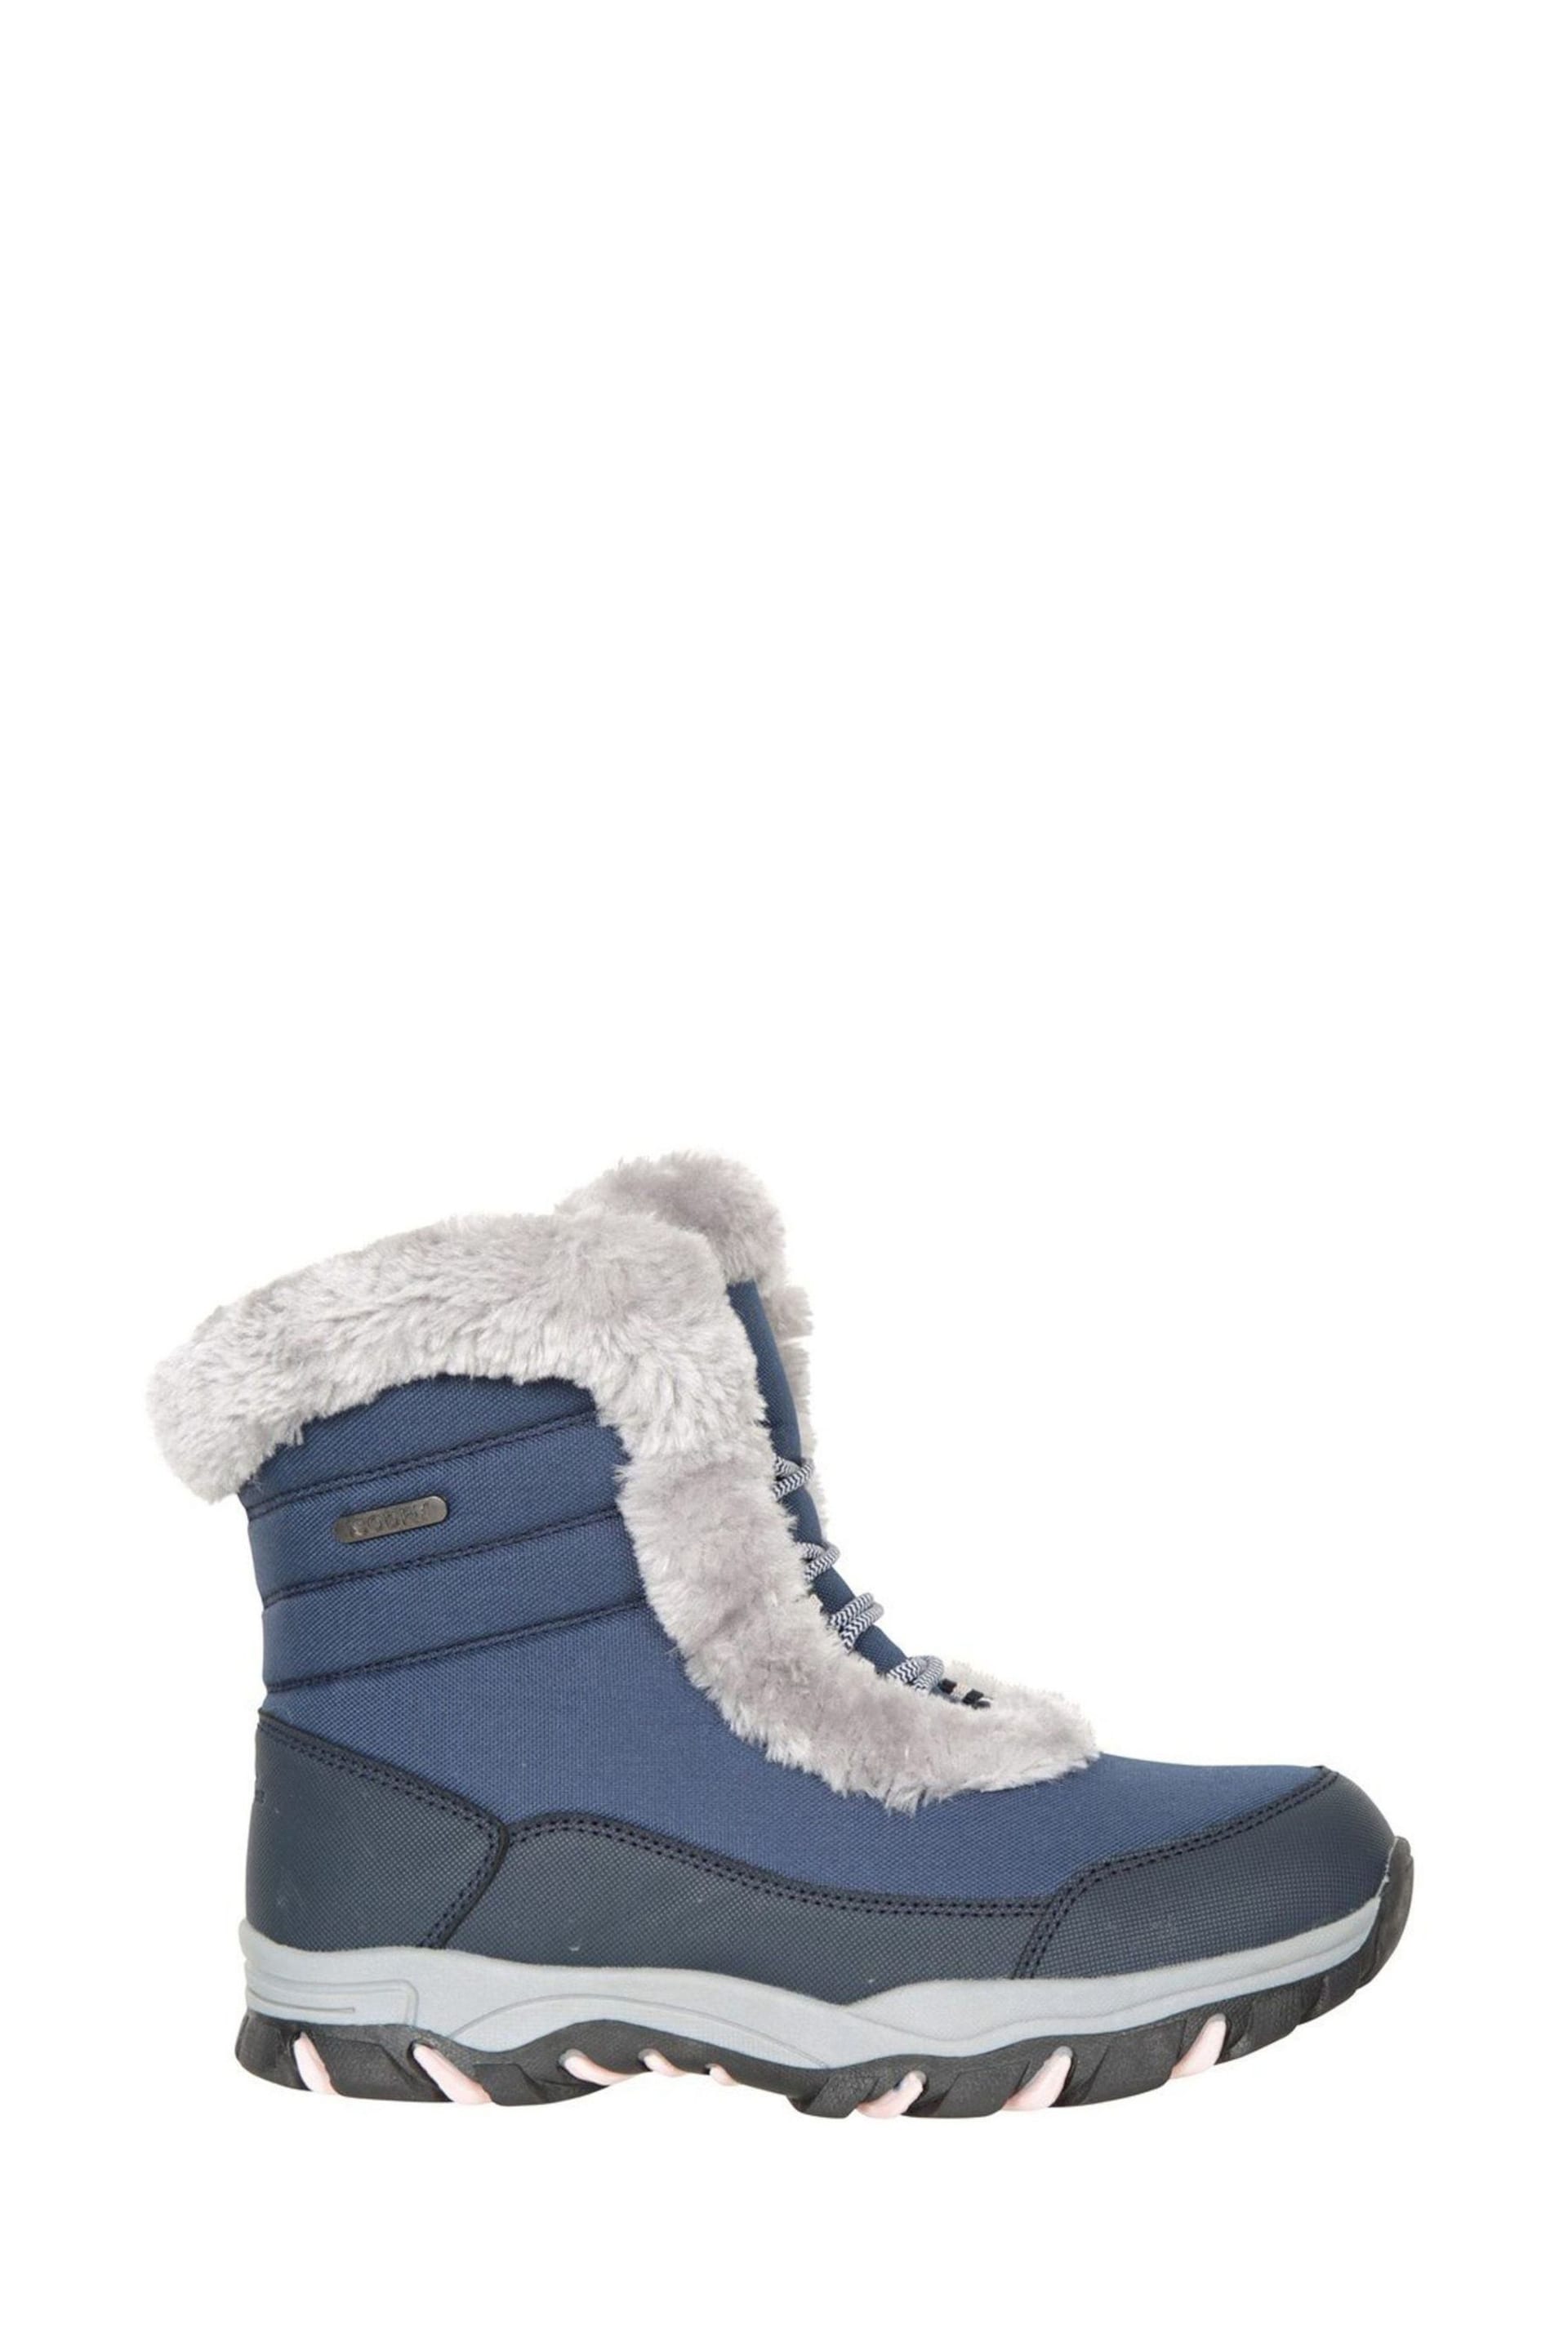 Mountain Warehouse Blue Ohio Short Thermal Snow Boots - Image 2 of 3